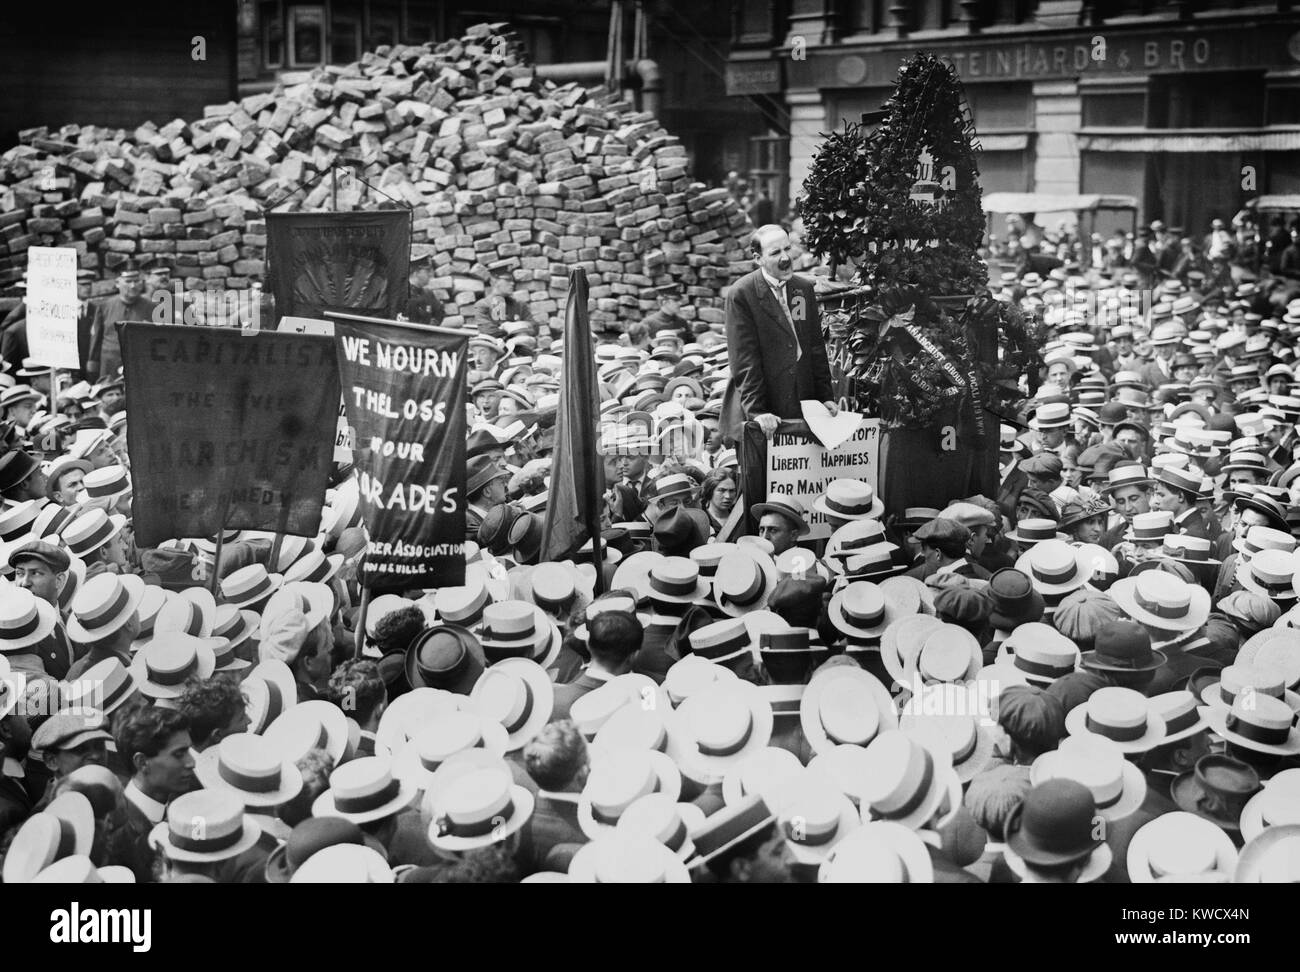 Anarchist Leonard Abbott speaking at a memorial demonstration for the dead IWW conspirators. Two men of the Anarchist Black Cross, Carl Hanson, and Charles Berg, were killed. Also dead was IWW radical, Arthur Caron. The bomb to murder John D. Rockefeller exploded as they were building it, in NYC on July 4, 1913 (BSLOC 2017 2 165) Stock Photo